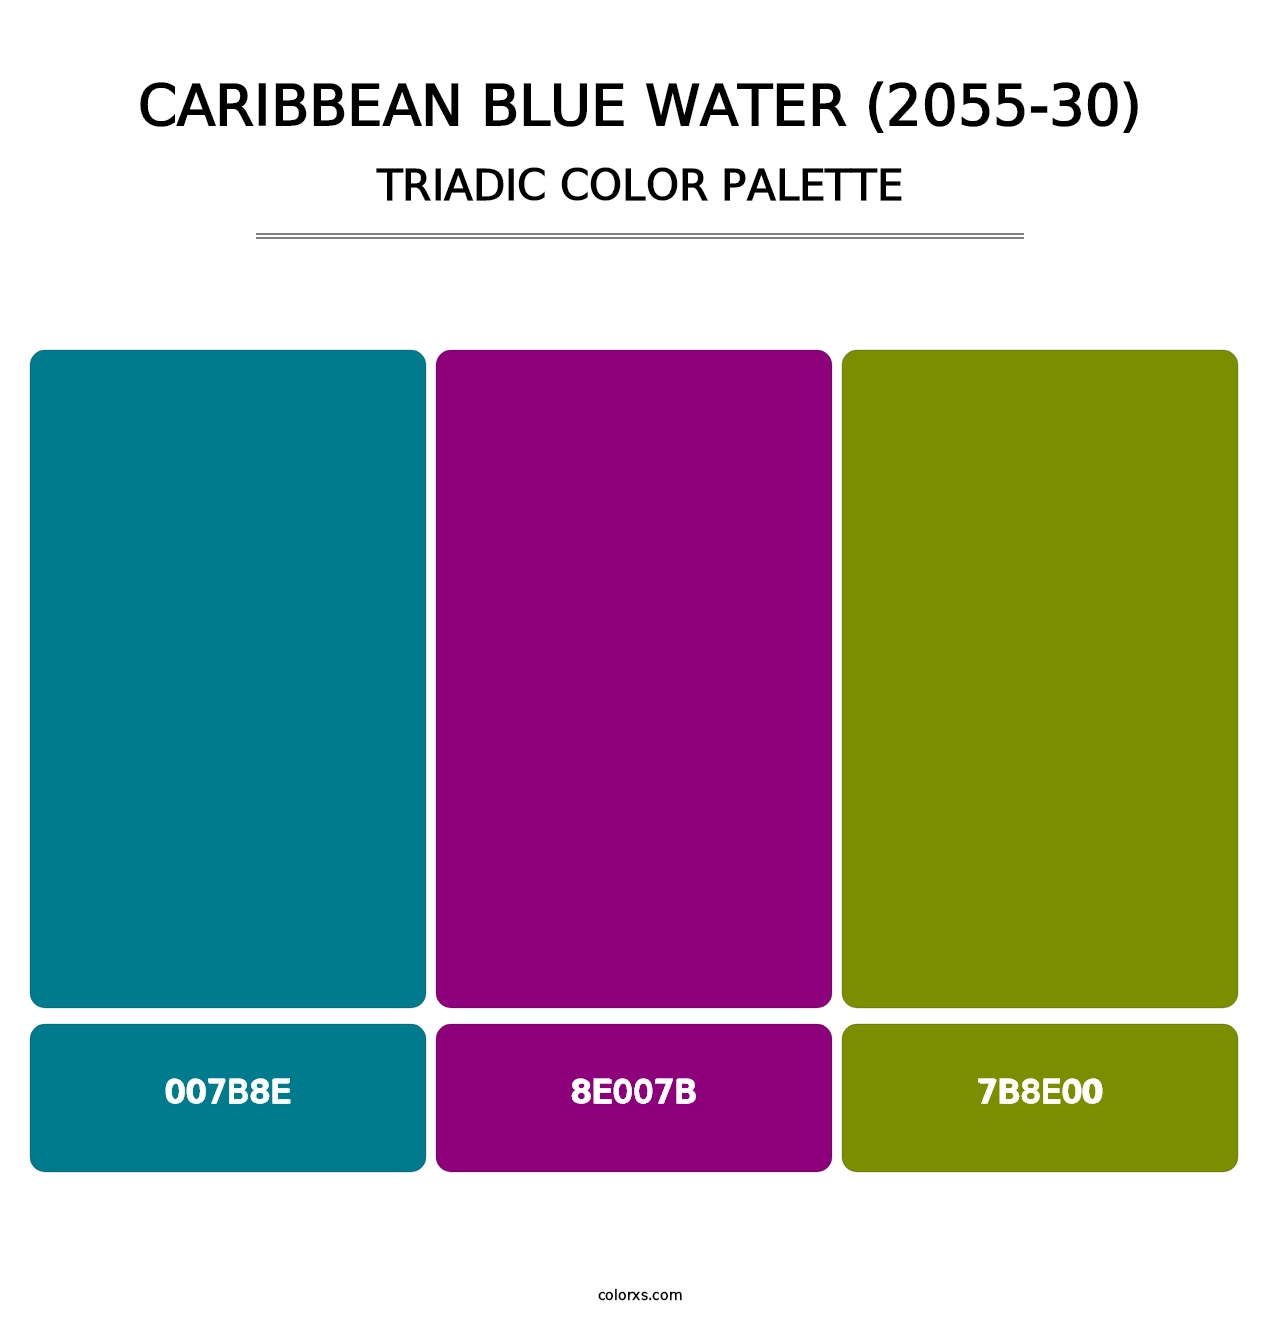 Caribbean Blue Water (2055-30) - Triadic Color Palette